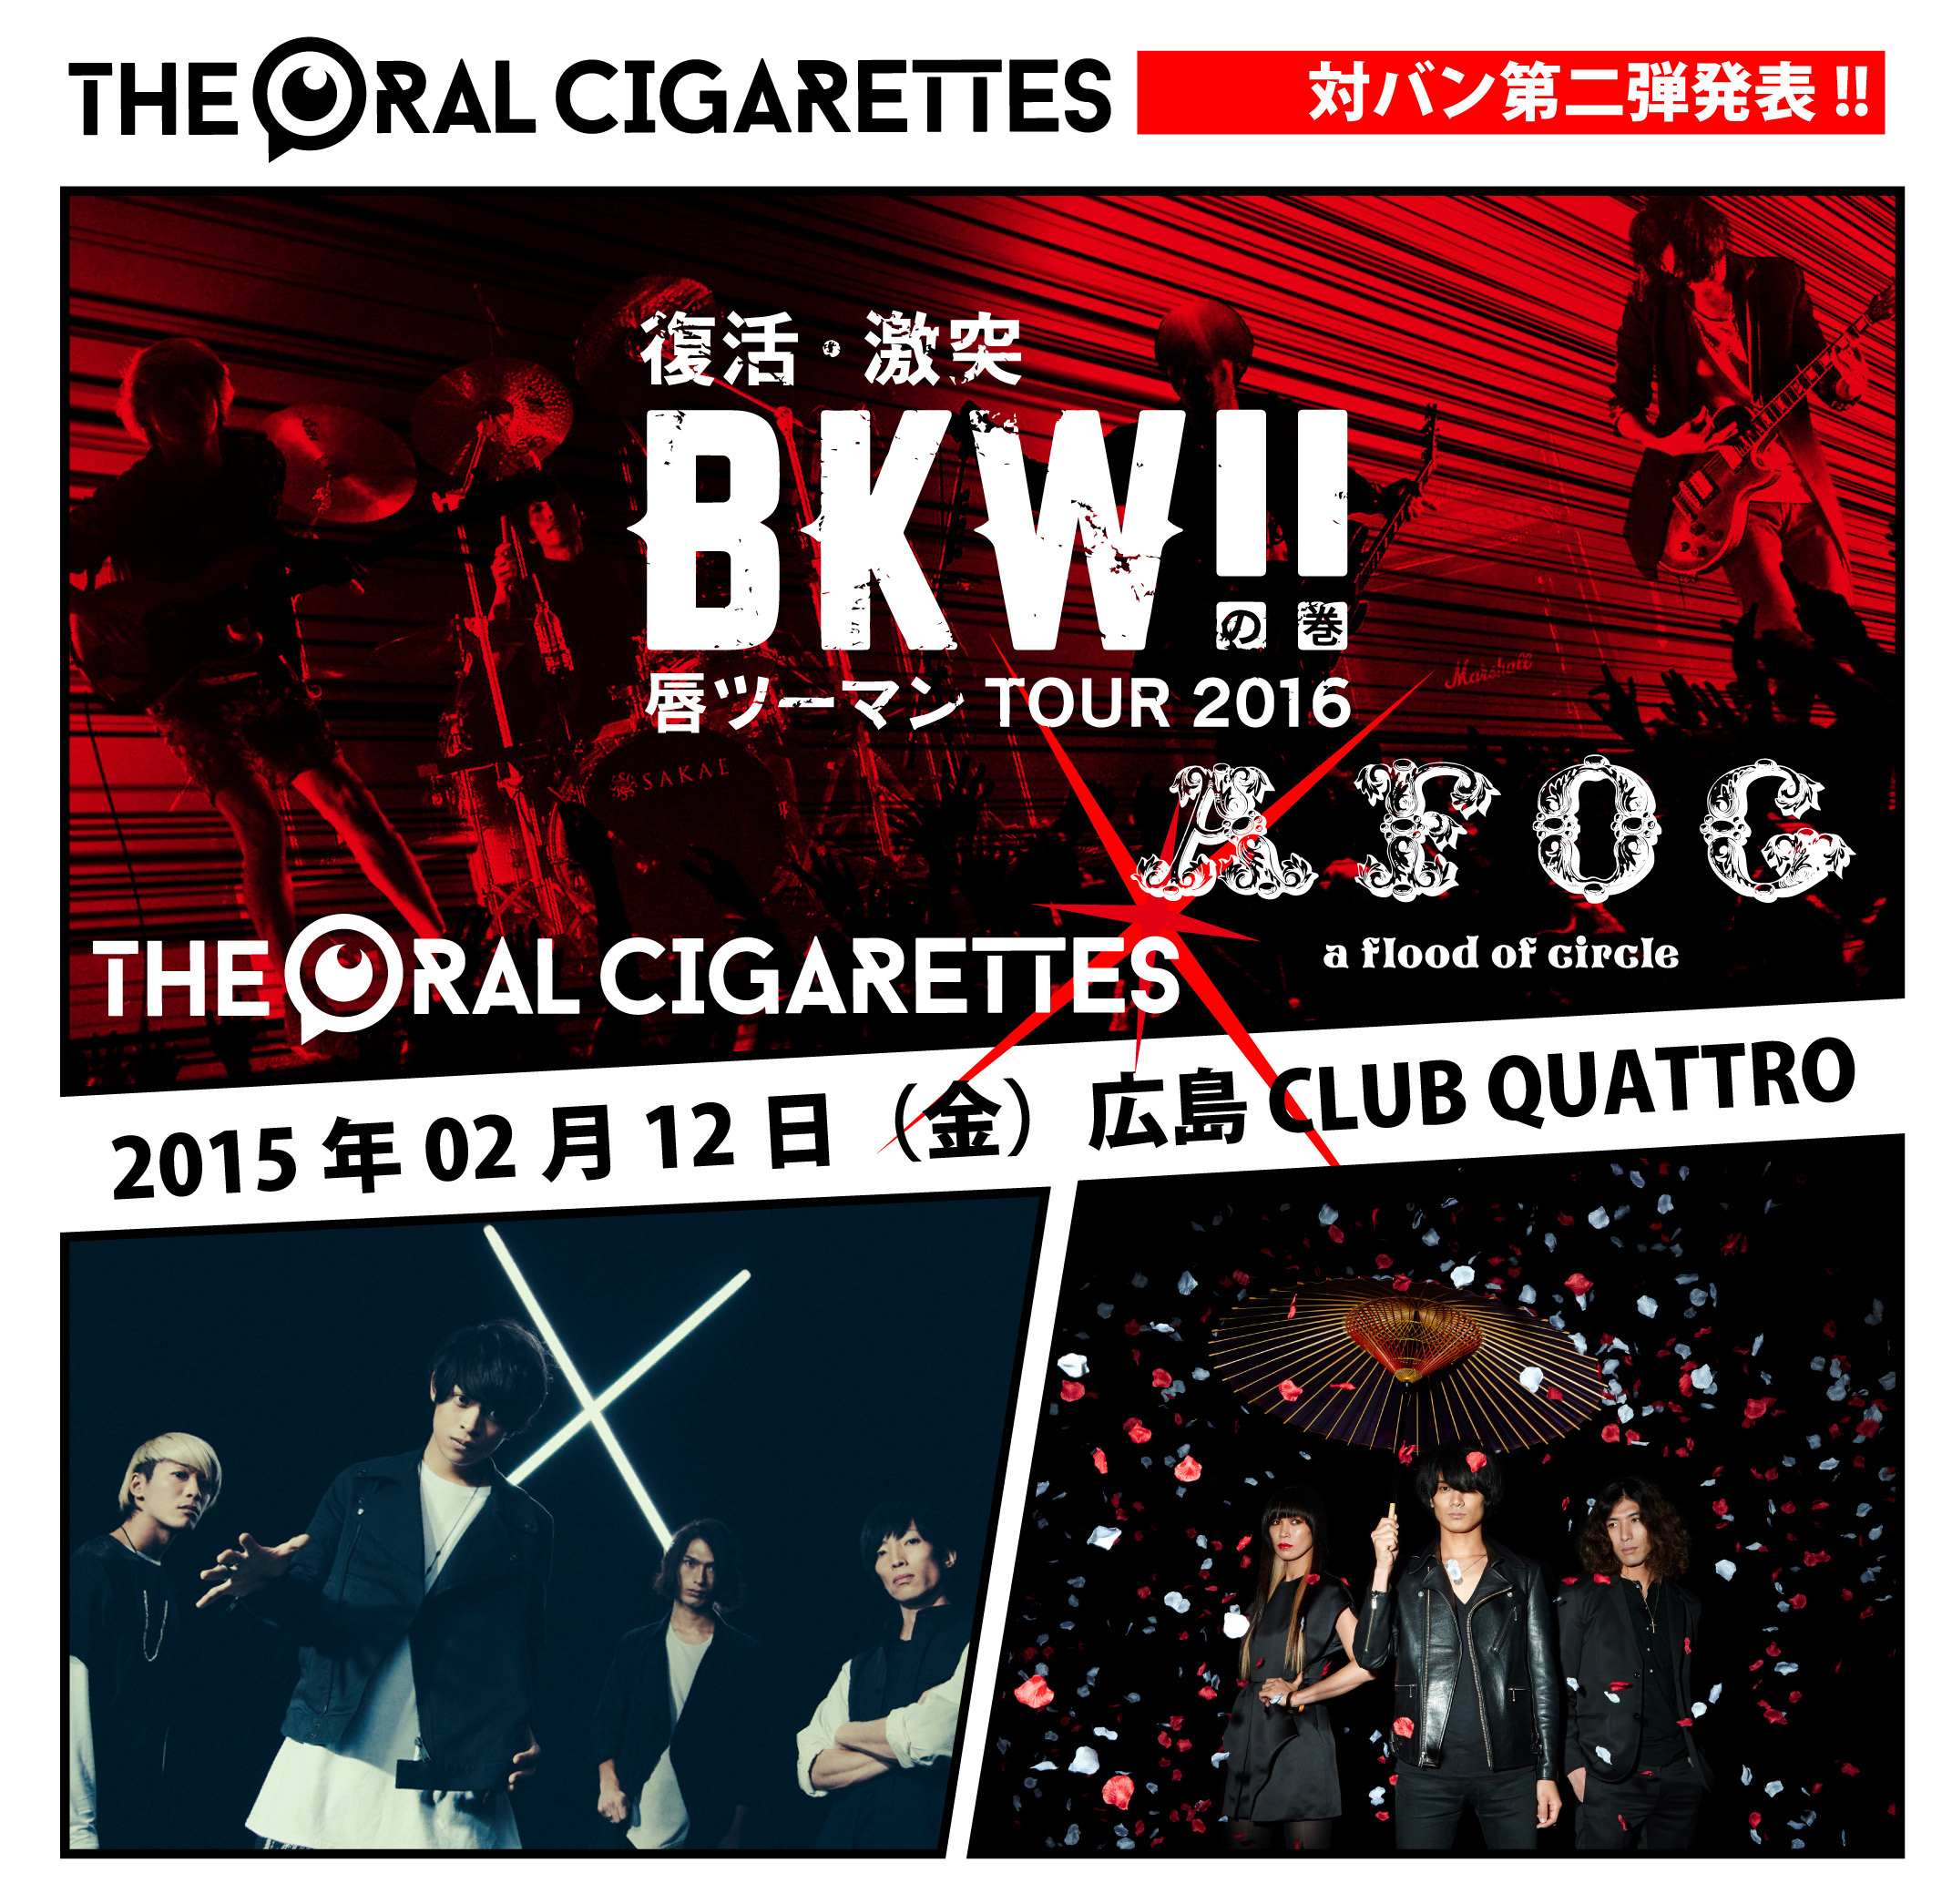 THE ORAL CIGARETTES ２マンツアー新潟LOTSで04 Limited Sazabysと激突